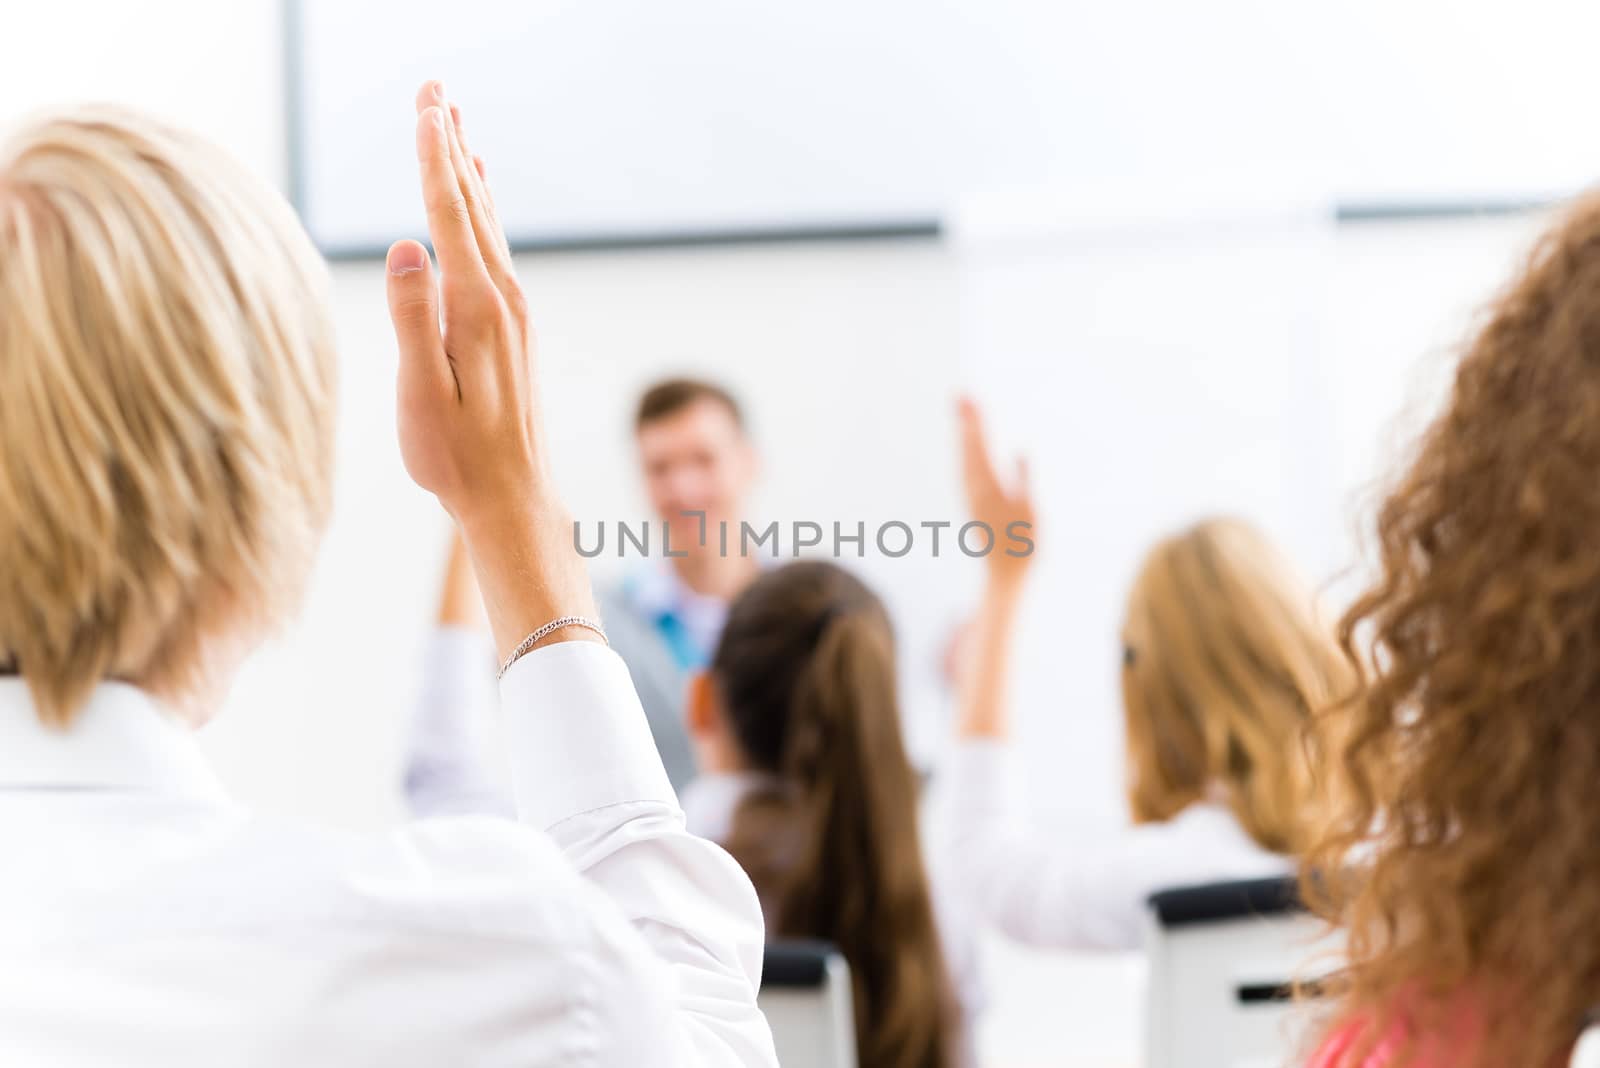 image of a male hand raised in university classroom